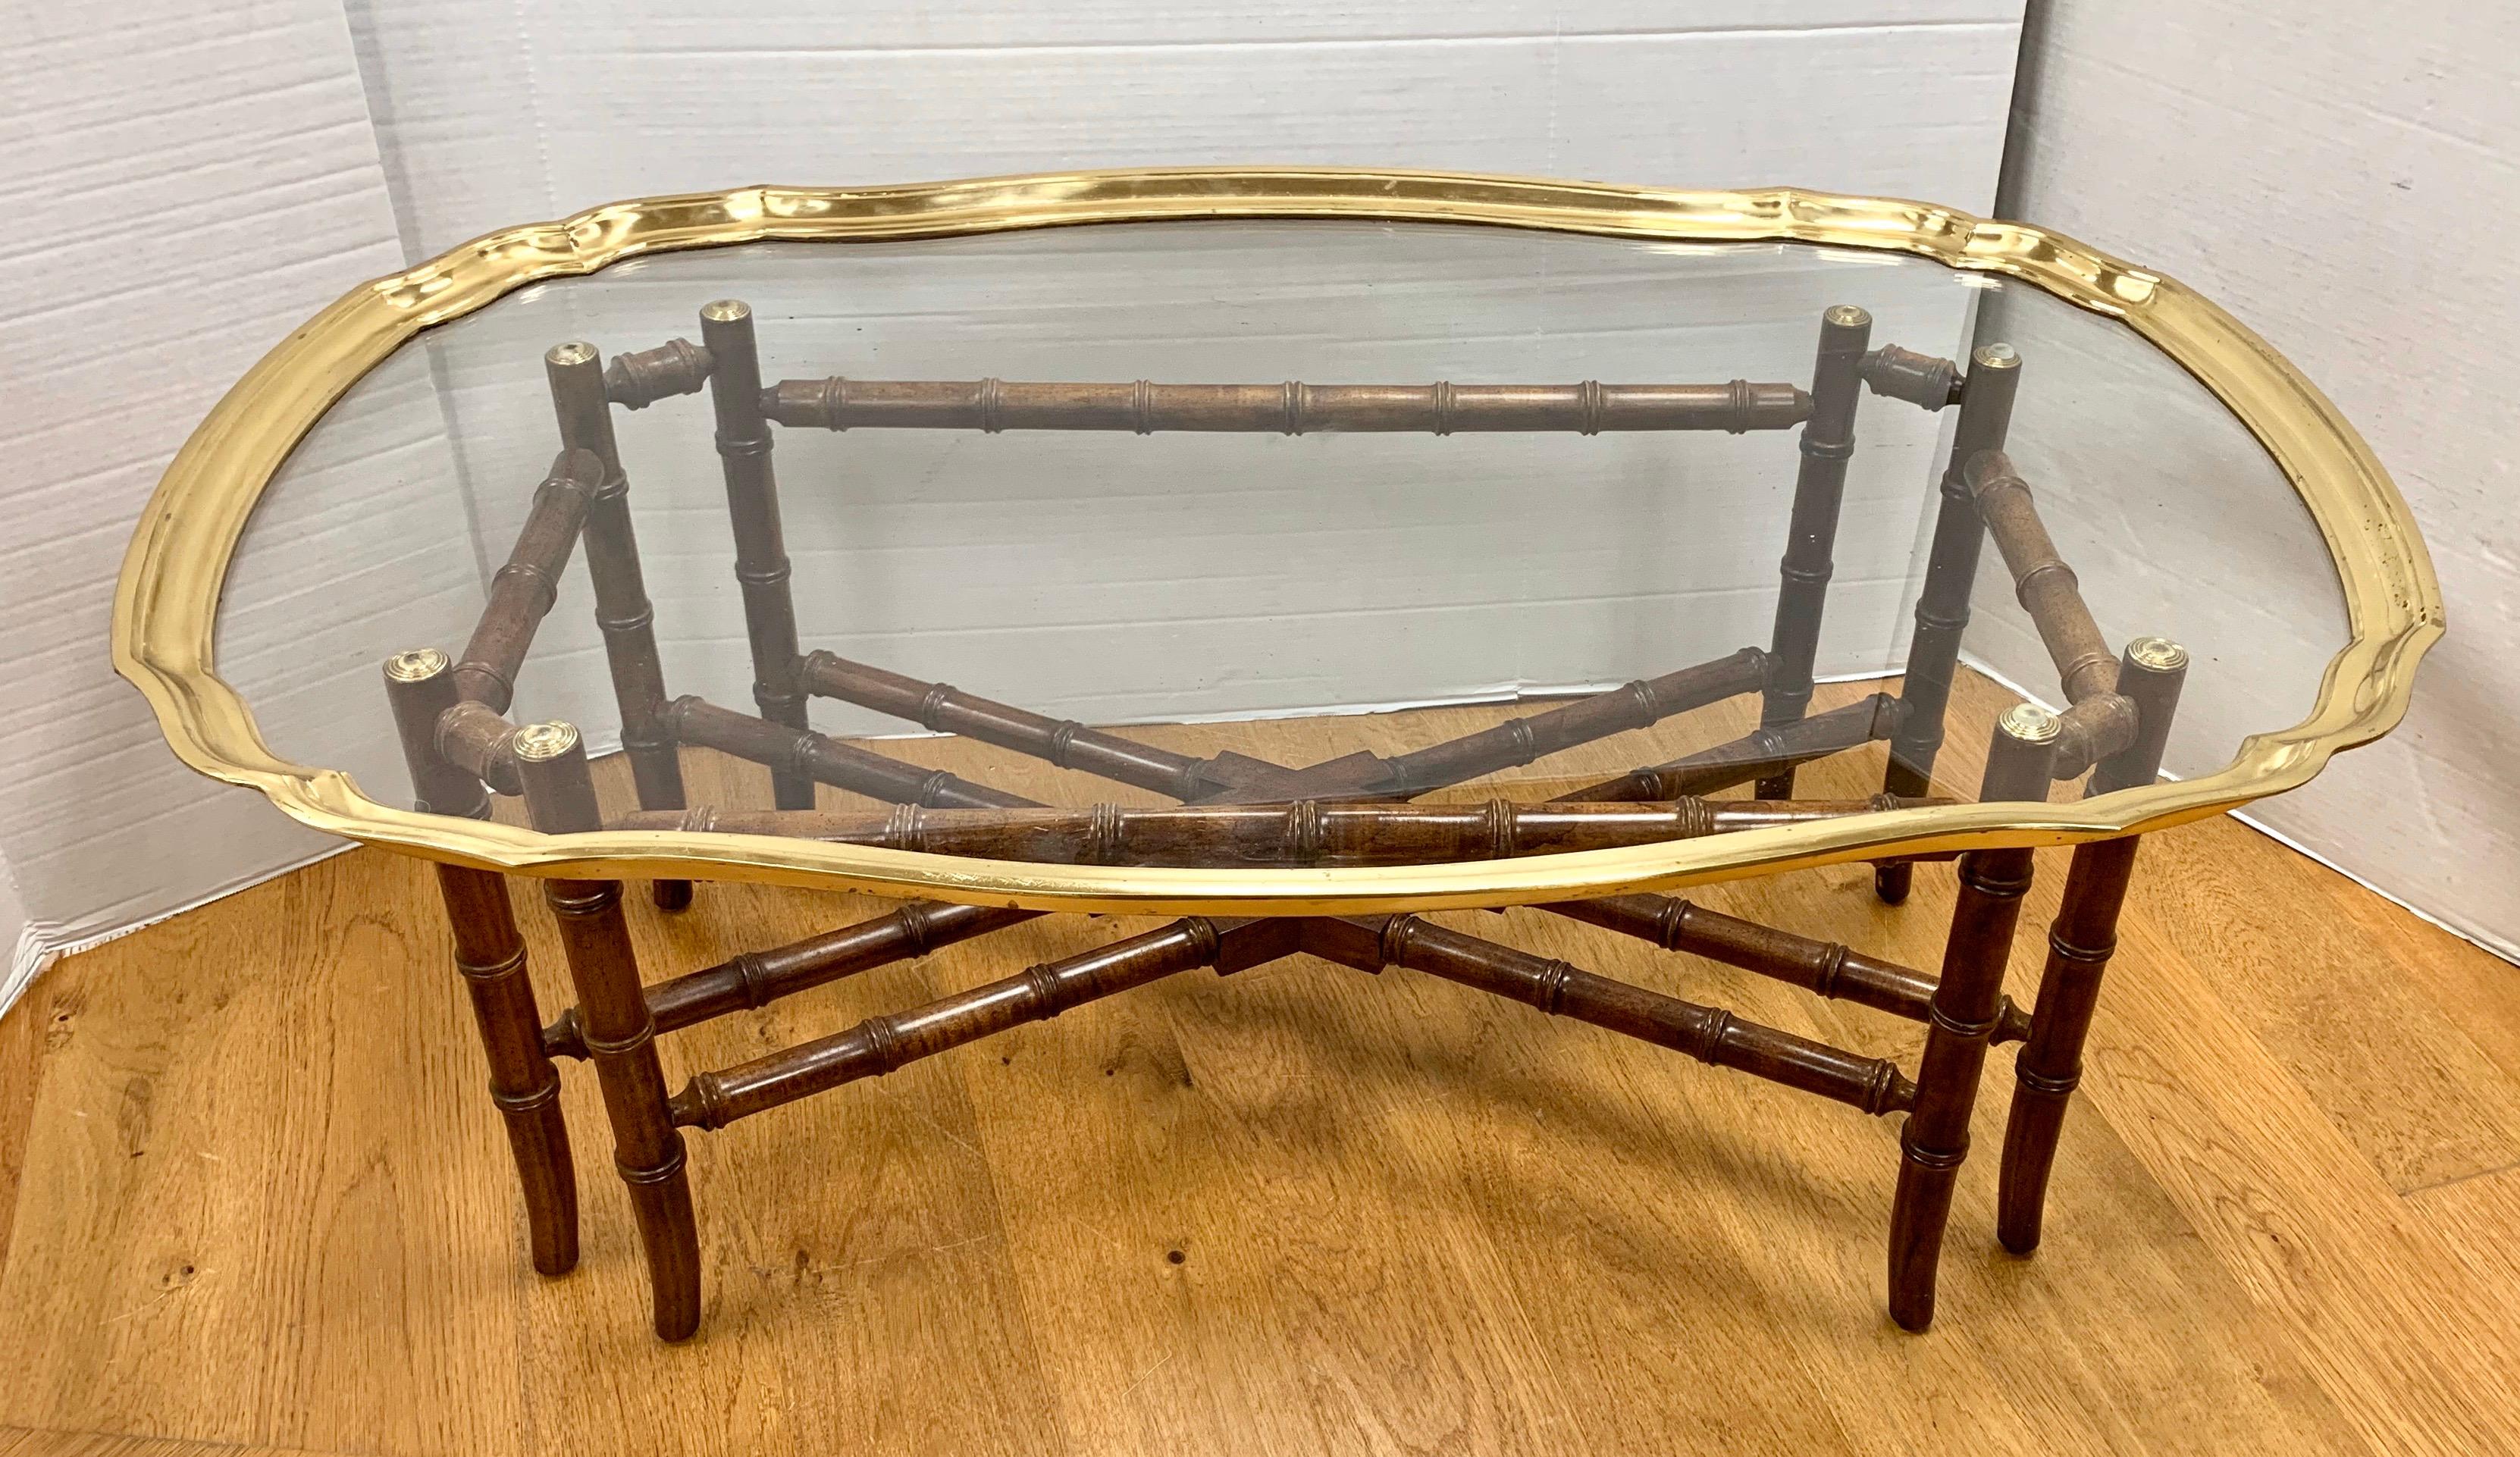 Vintage brass and glass tray top with scalloped rim sits atop a carved faux bamboo wood base. Base is constructed of stained wood and does not collapse. Brass and glass top is removable.  Made by Baker Furniture.